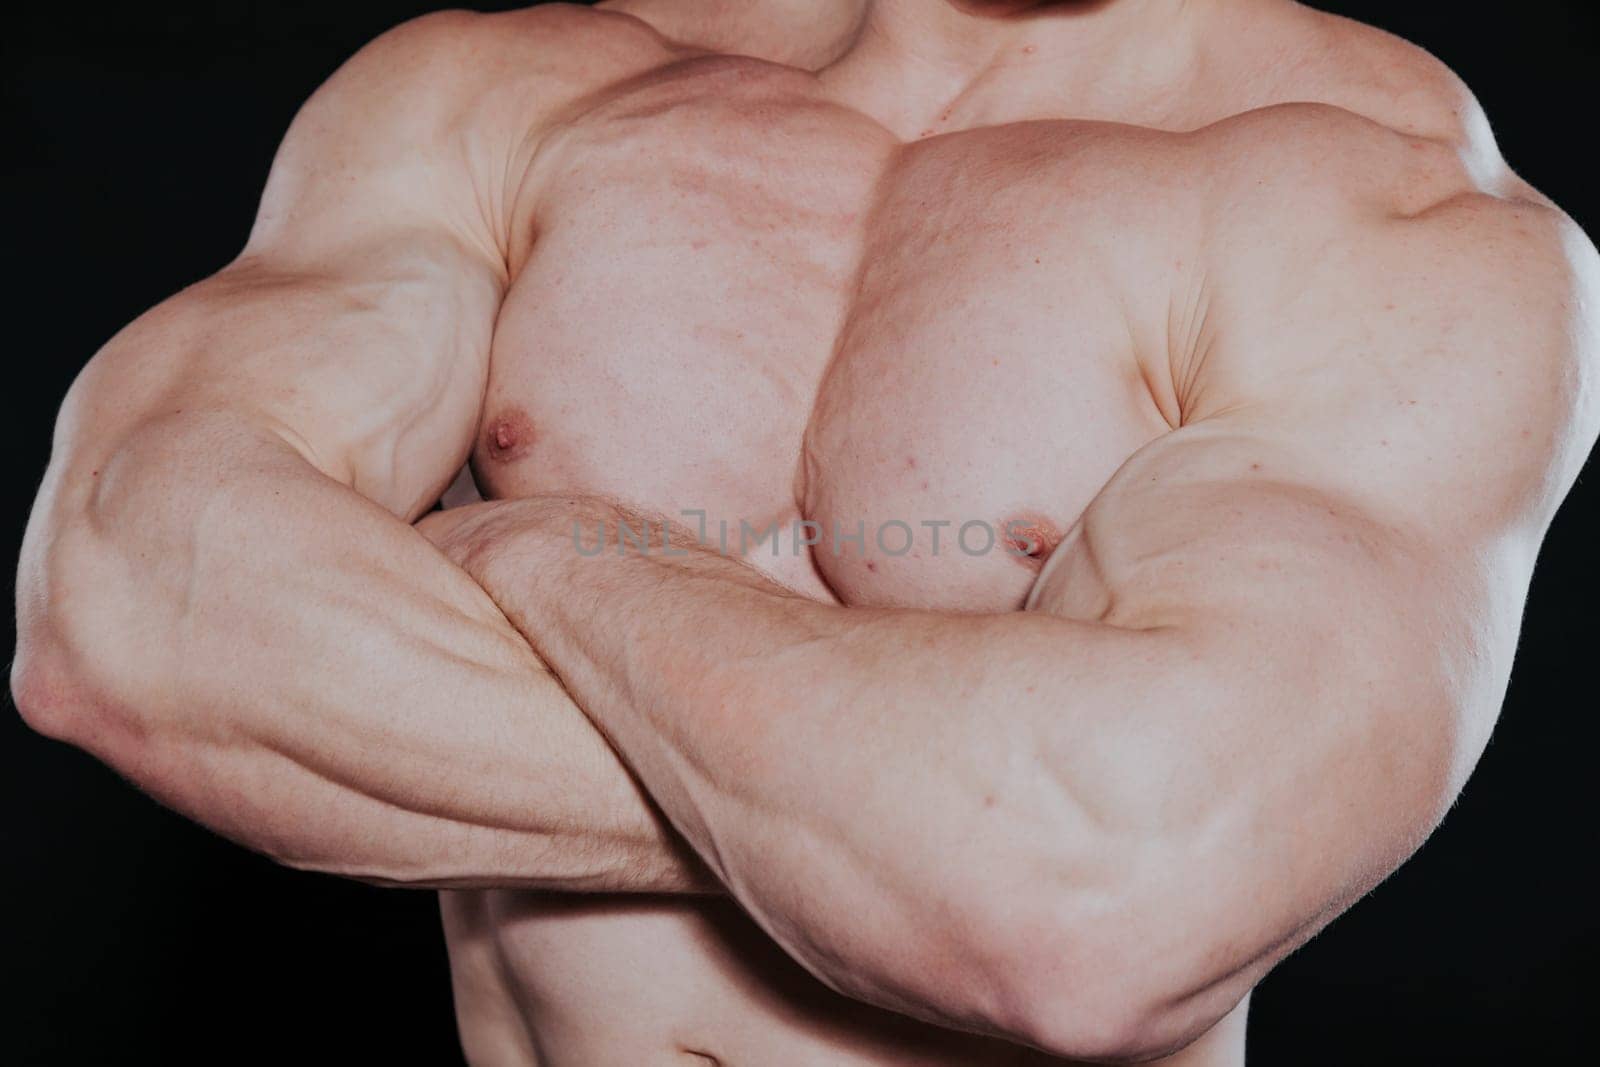 Sport the athlete bodybuilder shows off his muscles 2